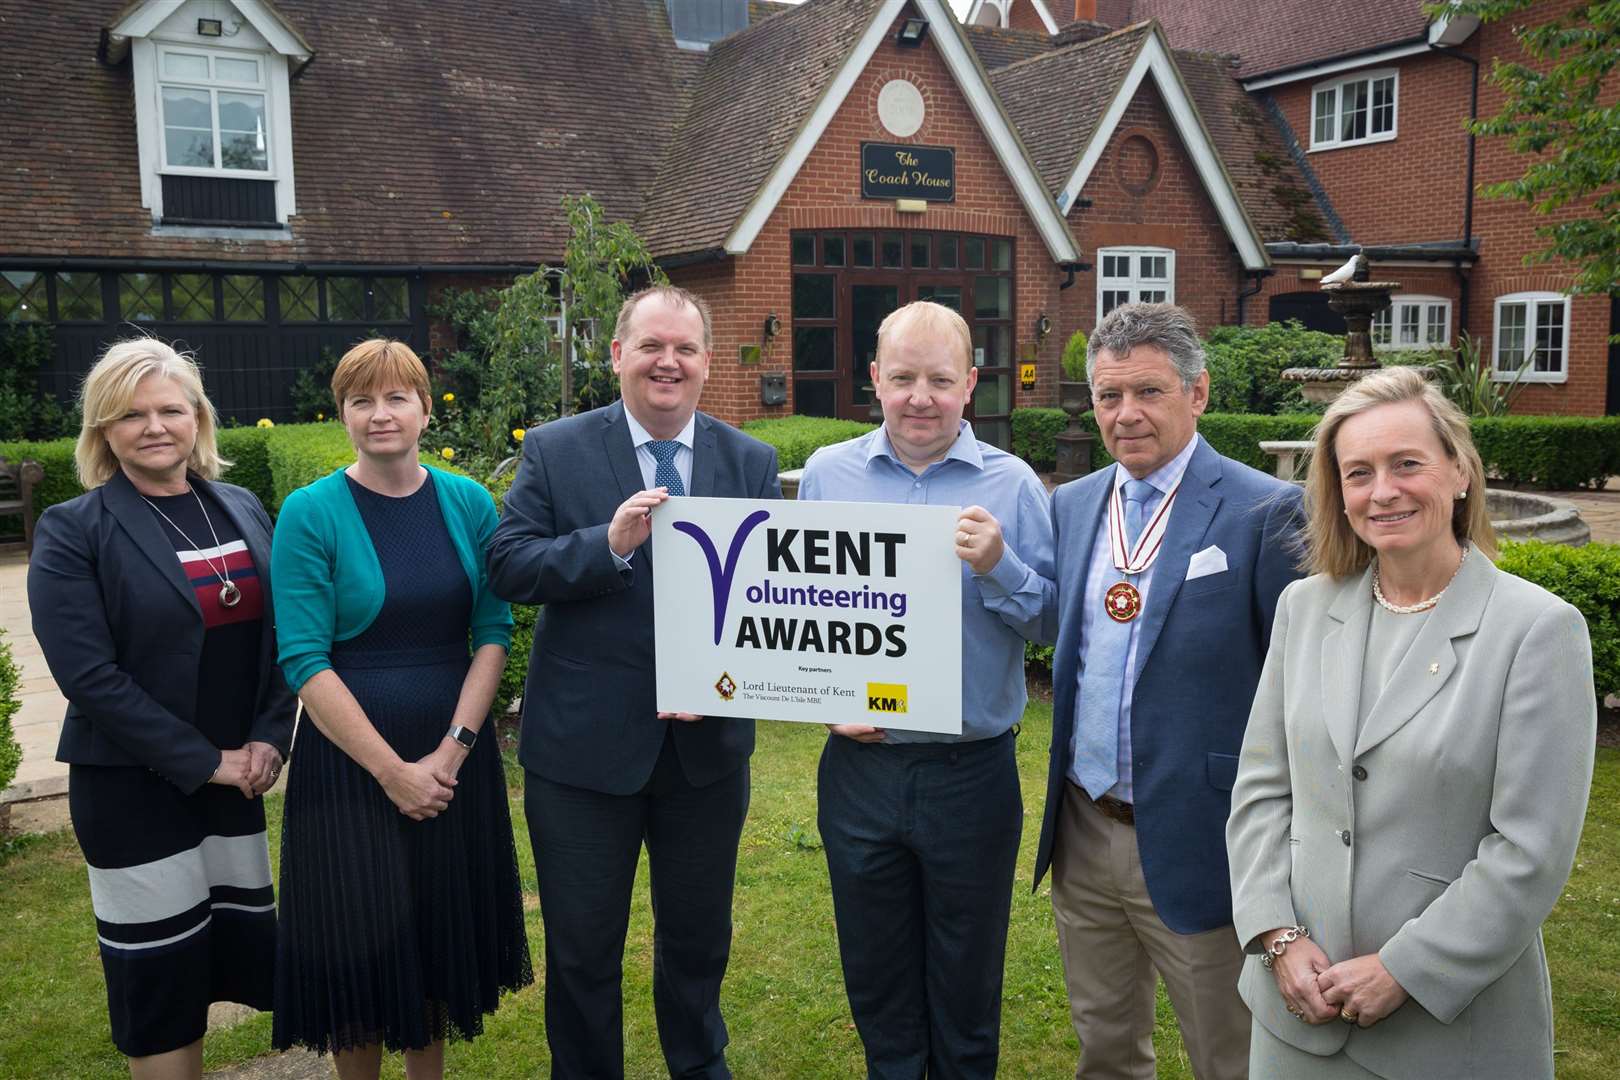 Kent Volunteering Awards judges Julie Maddocks of Maidstone Borough Council, Lauren Manning of the EKC Group, Rob Phillips of the office of the Kent police and crime commissioner, Robert Crook of Pfizer, Deputy Lord Lieutenant of Kent Paul Auston and KM Group chairman Geraldine Allinson